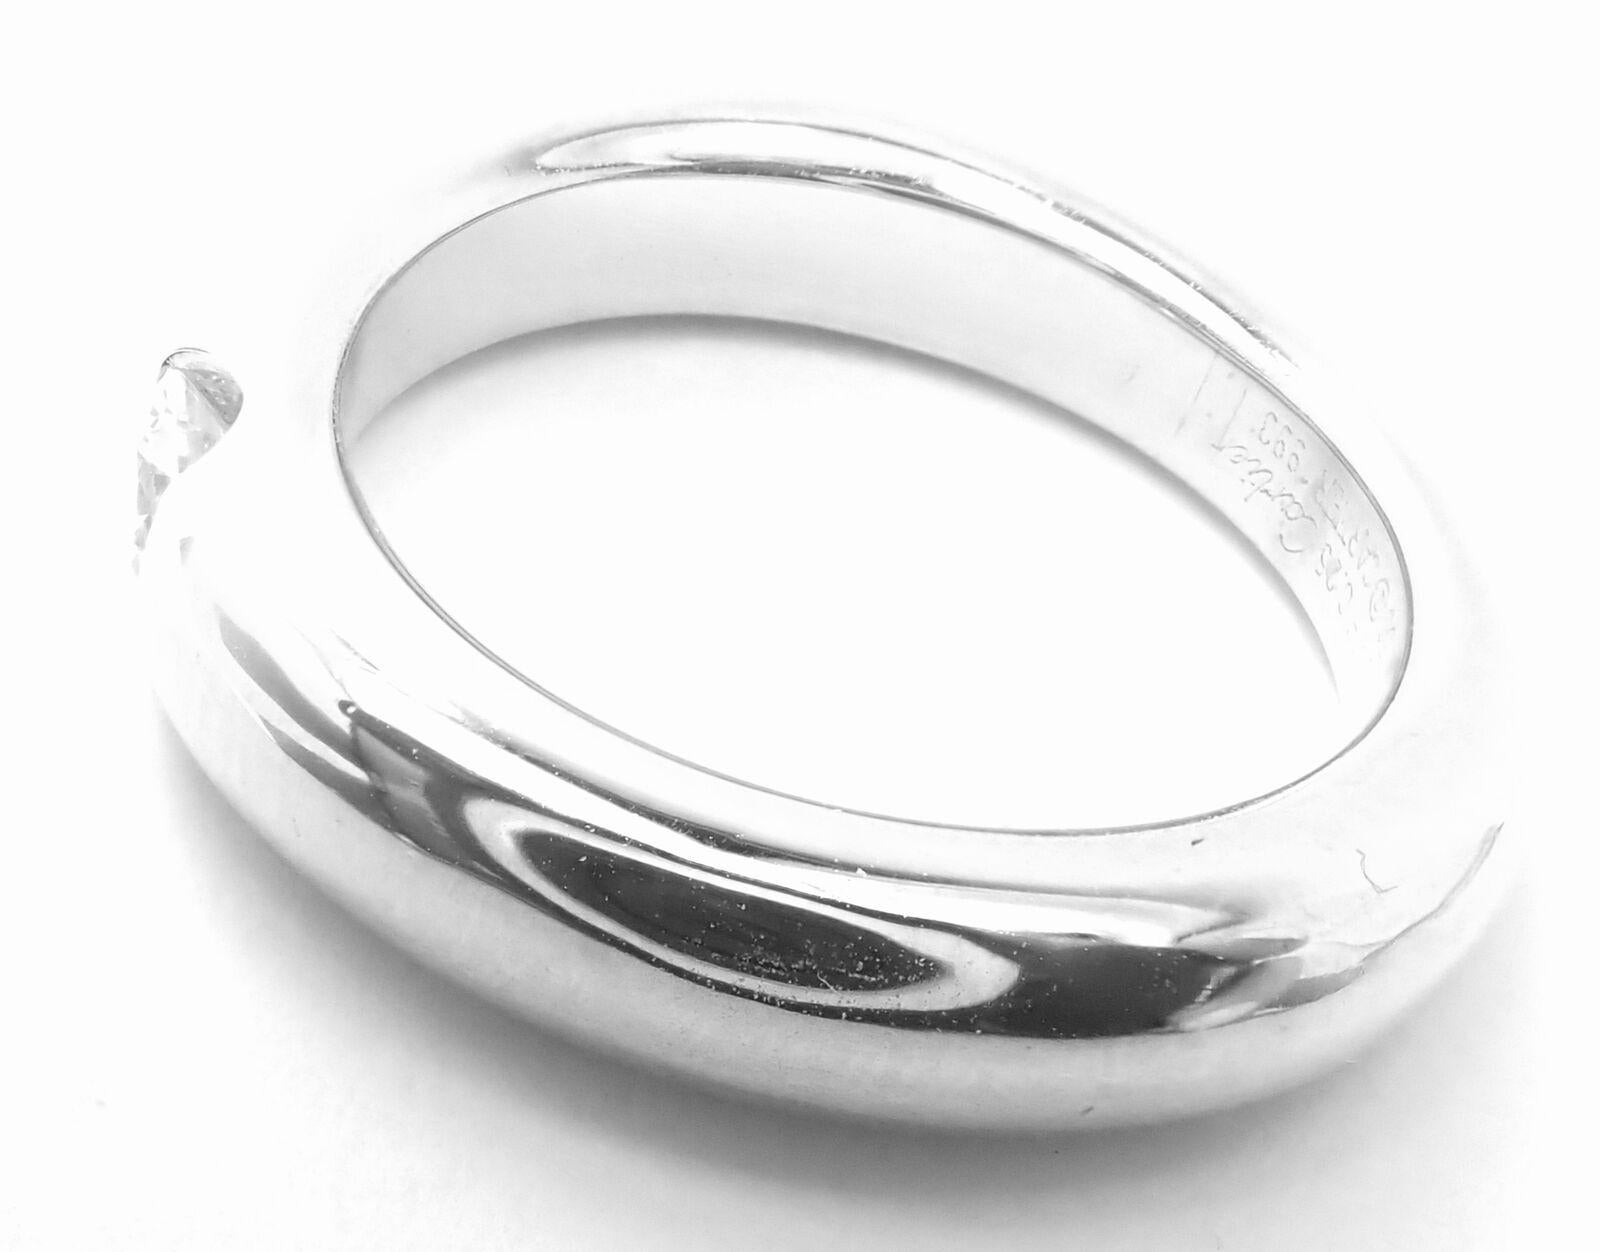 Cartier Ellipse Diamond White Gold Band Ring In Excellent Condition For Sale In Holland, PA